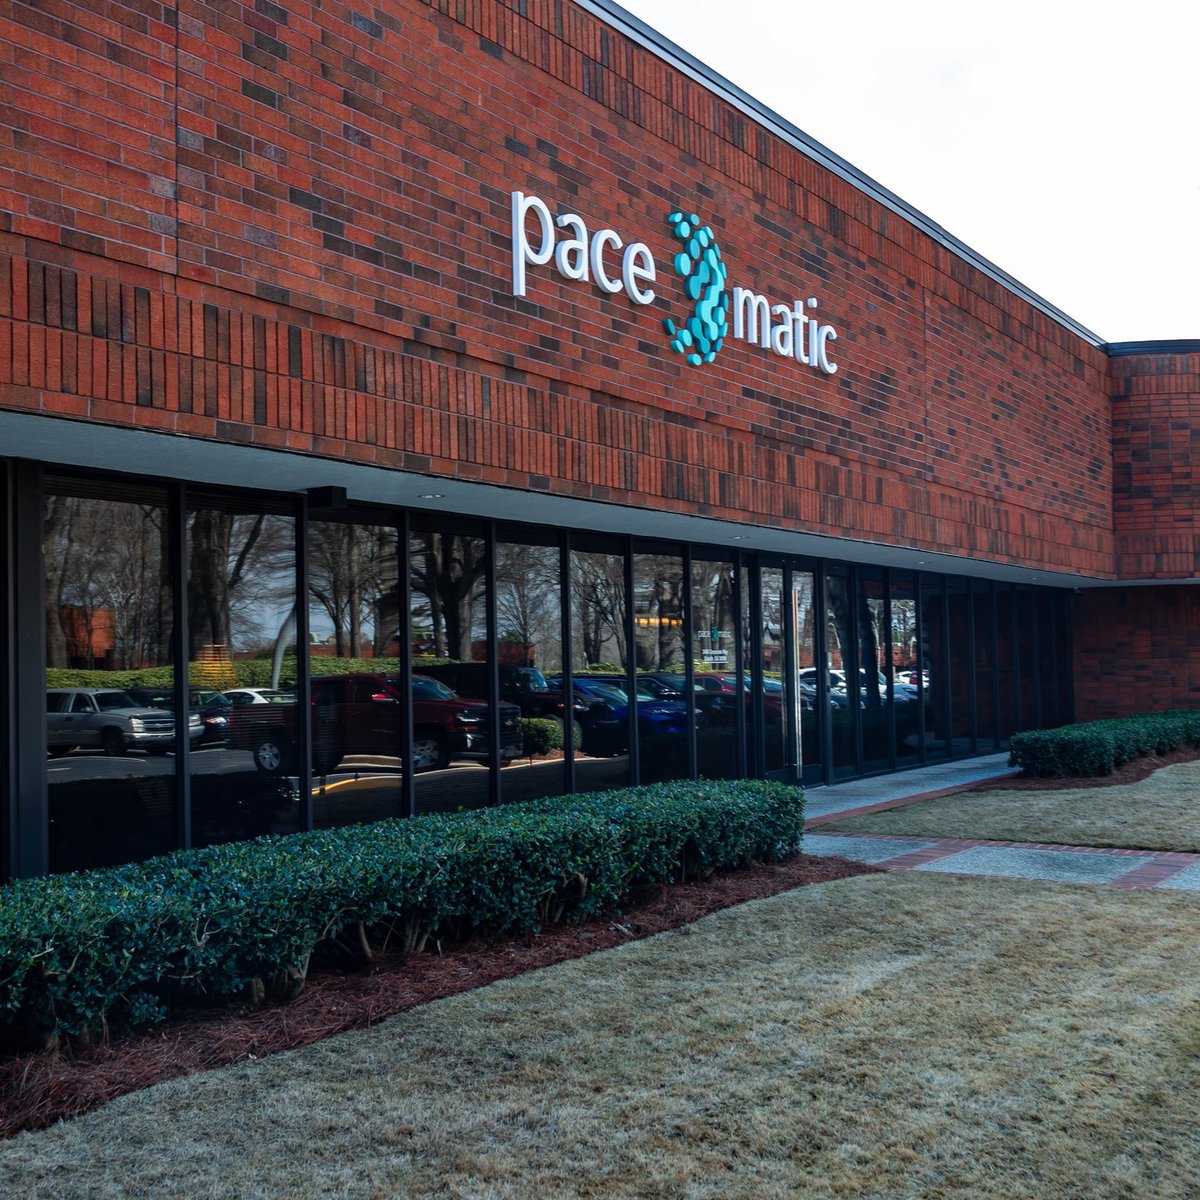 Where big ideas come to life. 💡 Join our incredible team by applying today! paceomatic.com/careers